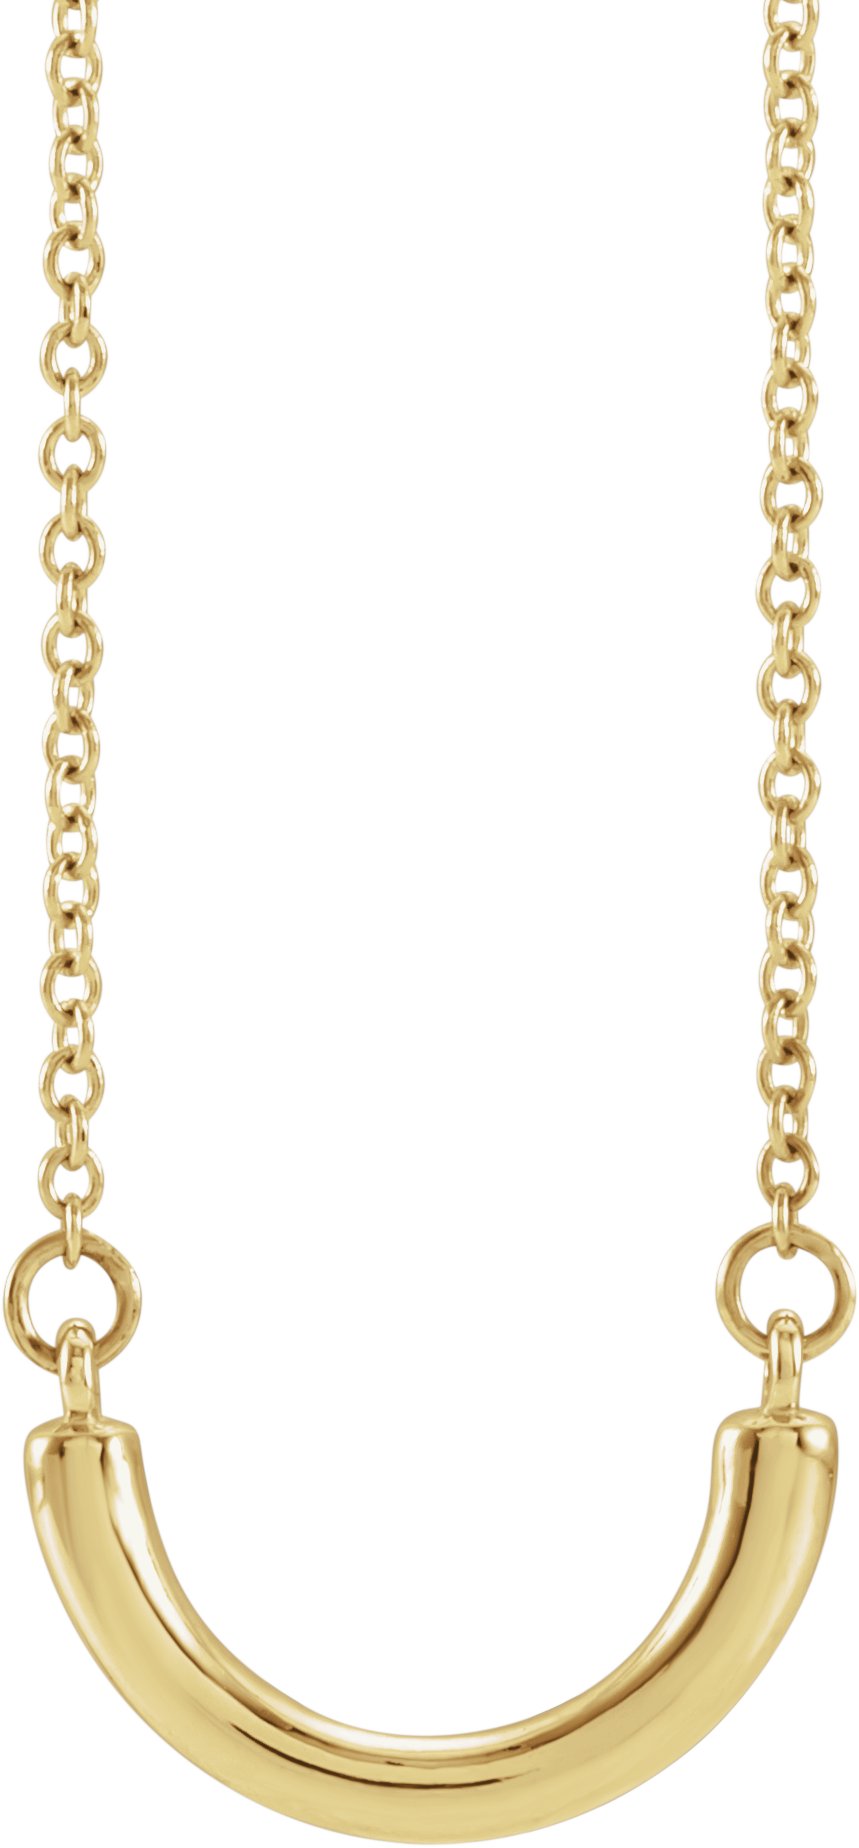 14K Yellow 9.6x5.7 mm Curved Bar 18" Necklace